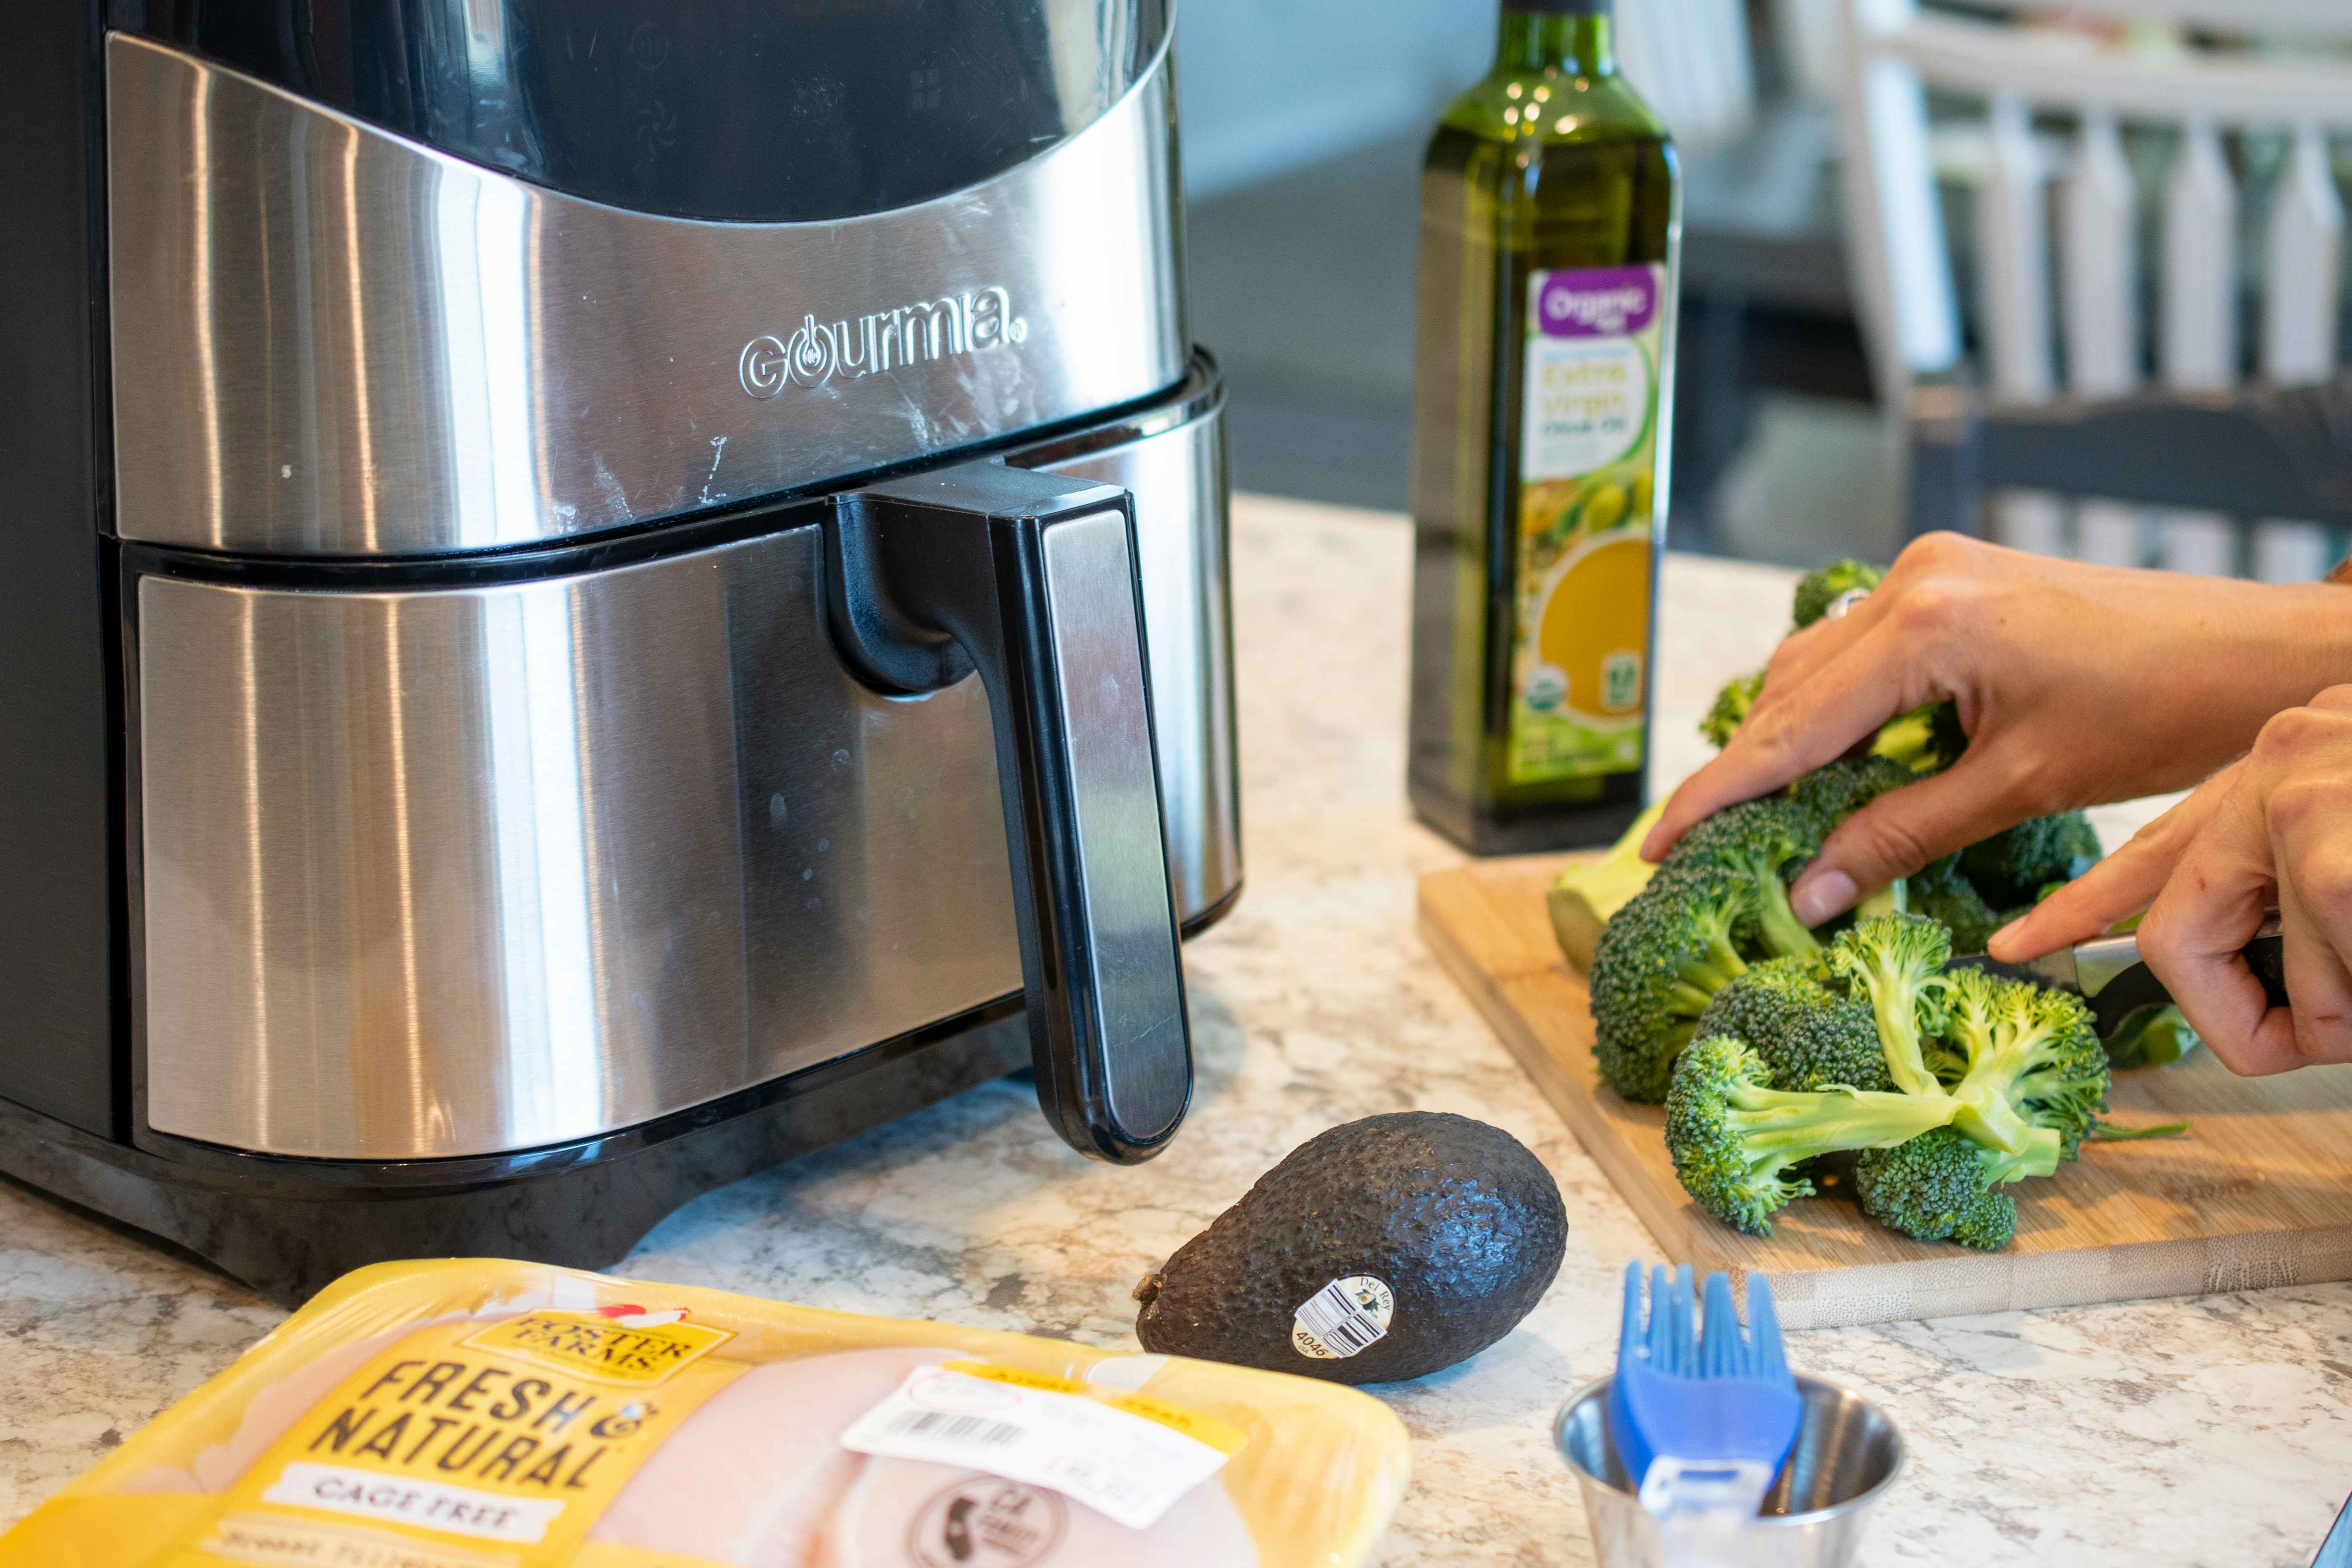 A person cutting broccoli next to other ingredients and an air fryer